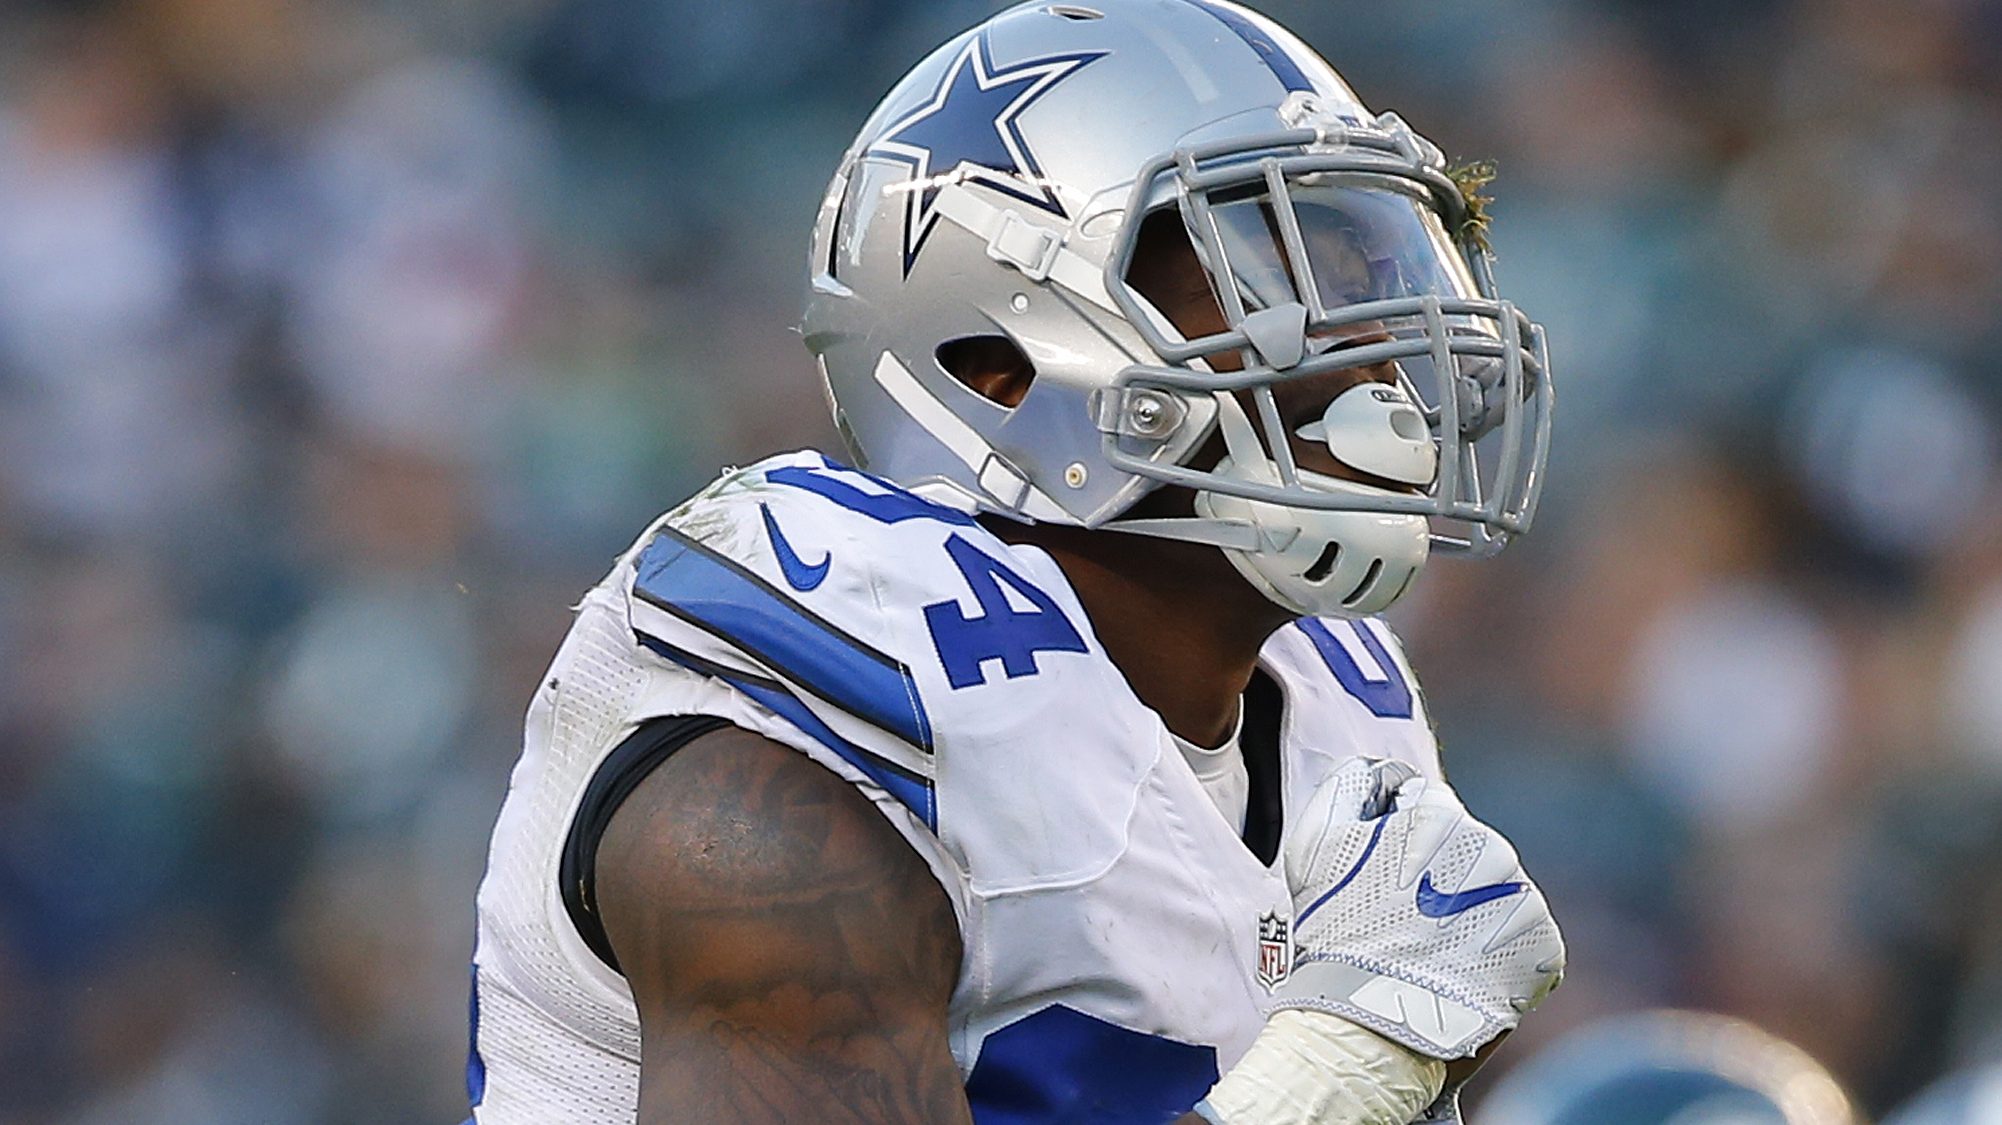 NFL - Broncos signing DE Randy Gregory to a five-year, $70